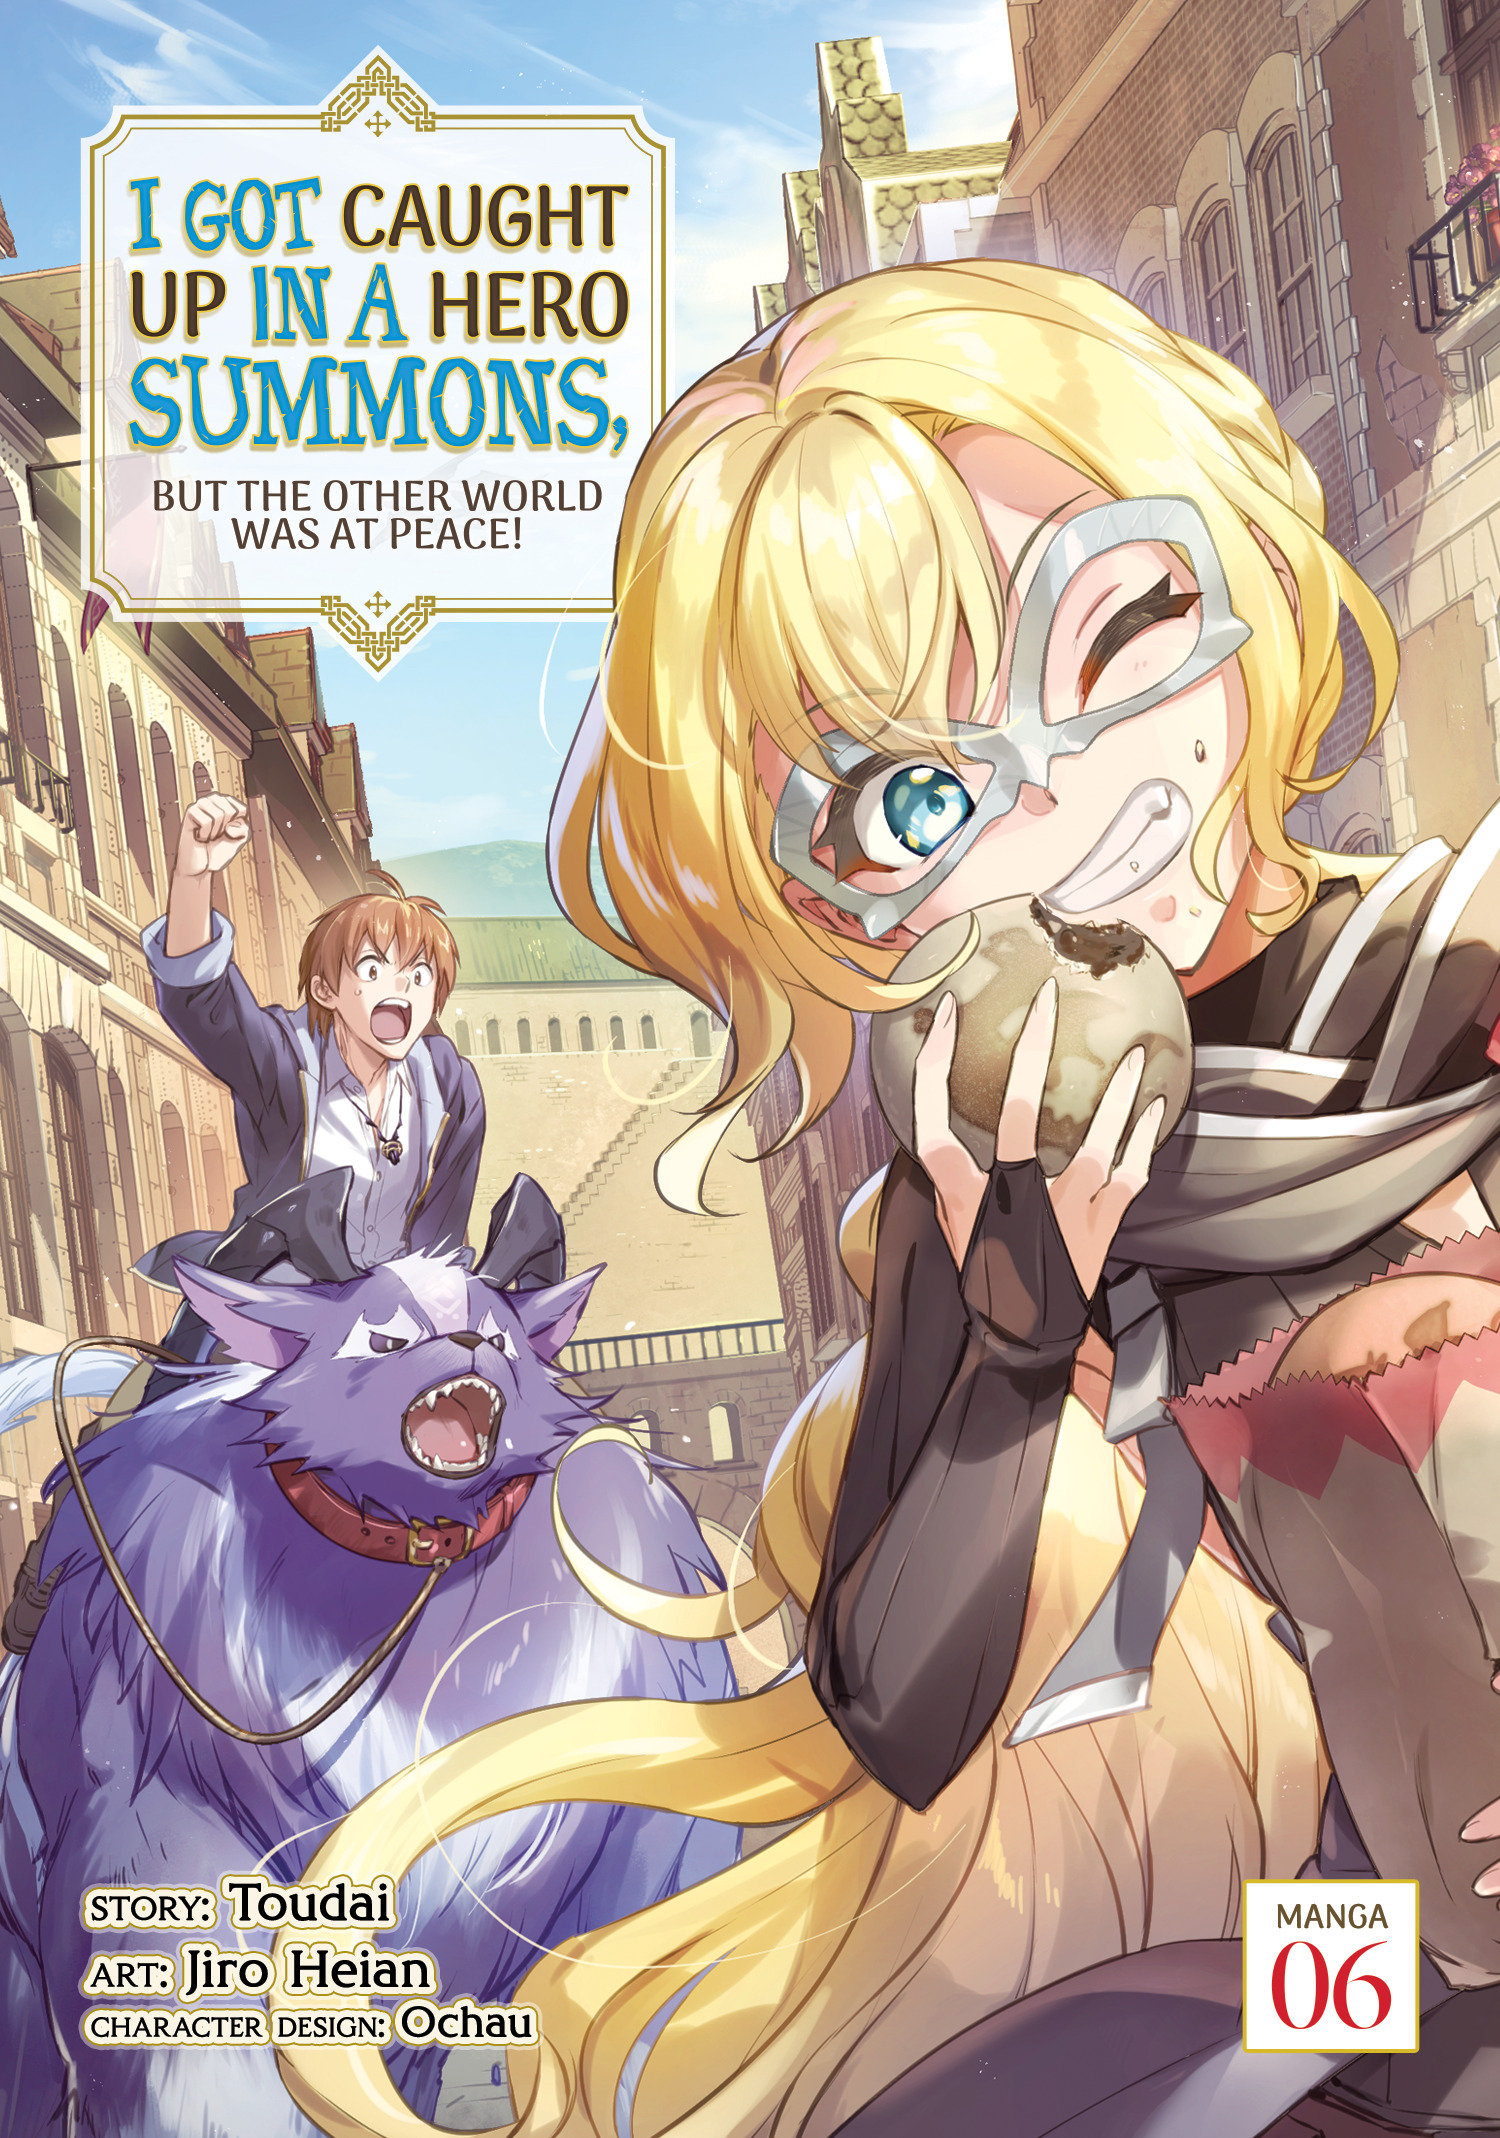 I Got Caught Up in a Hero Summons, But the Other World Was at Peace! Manga Volume 6